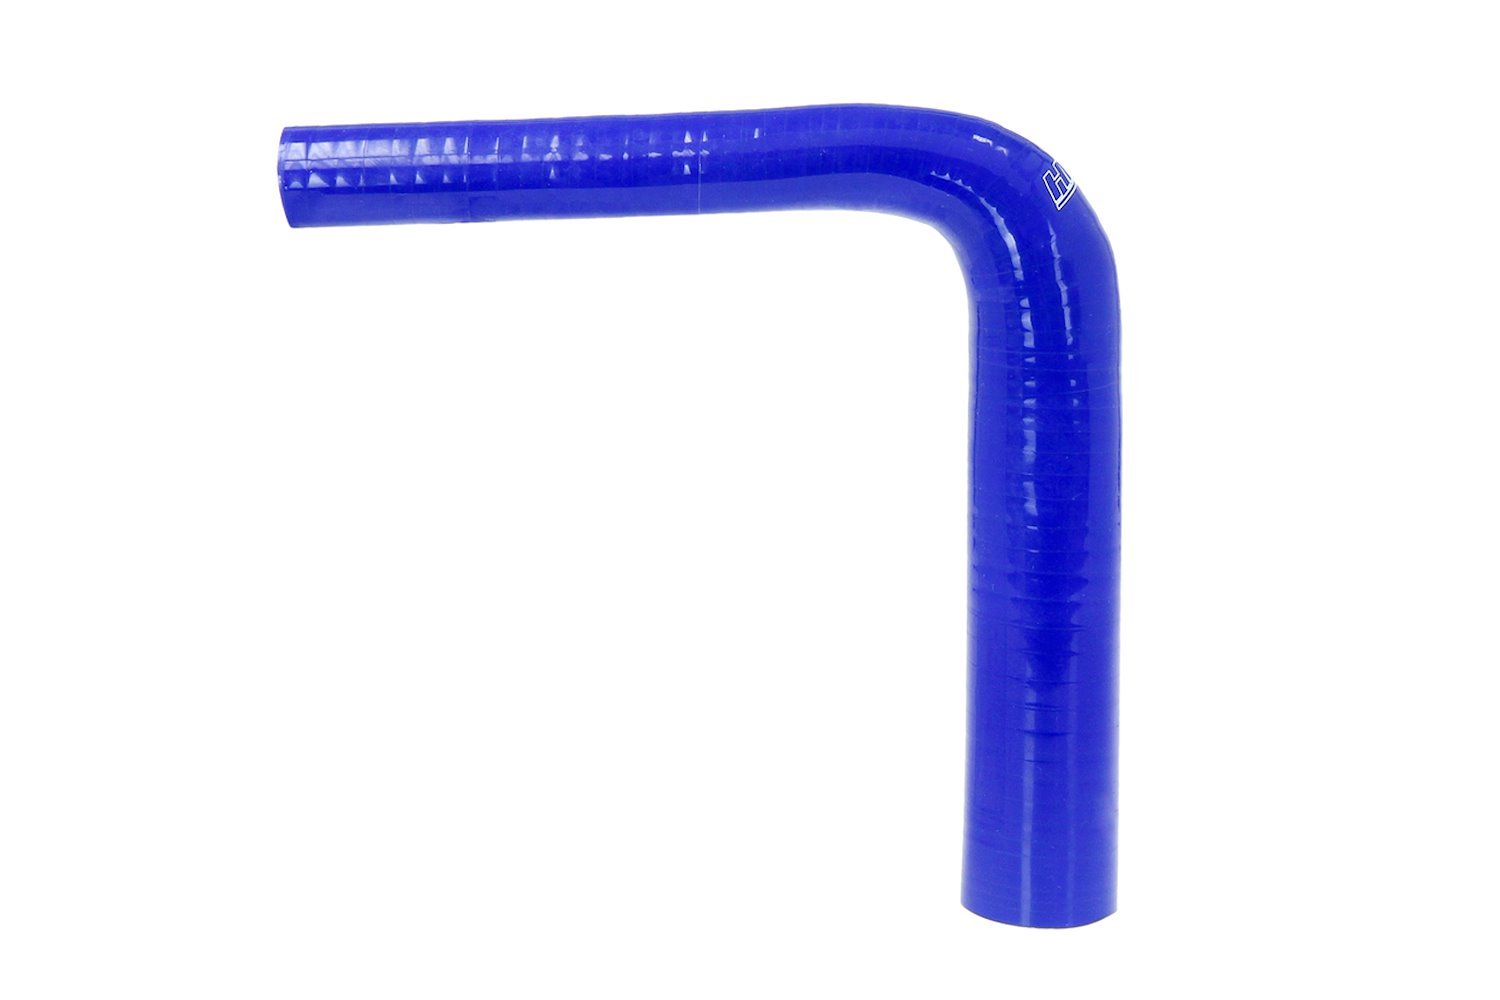 HTSER90-125-138-BLUE Silicone 90-Degree Elbow Hose, High-Temp 4-Ply Reinforced, 1-1/4 in. - 1-3/8 in. ID, Blue